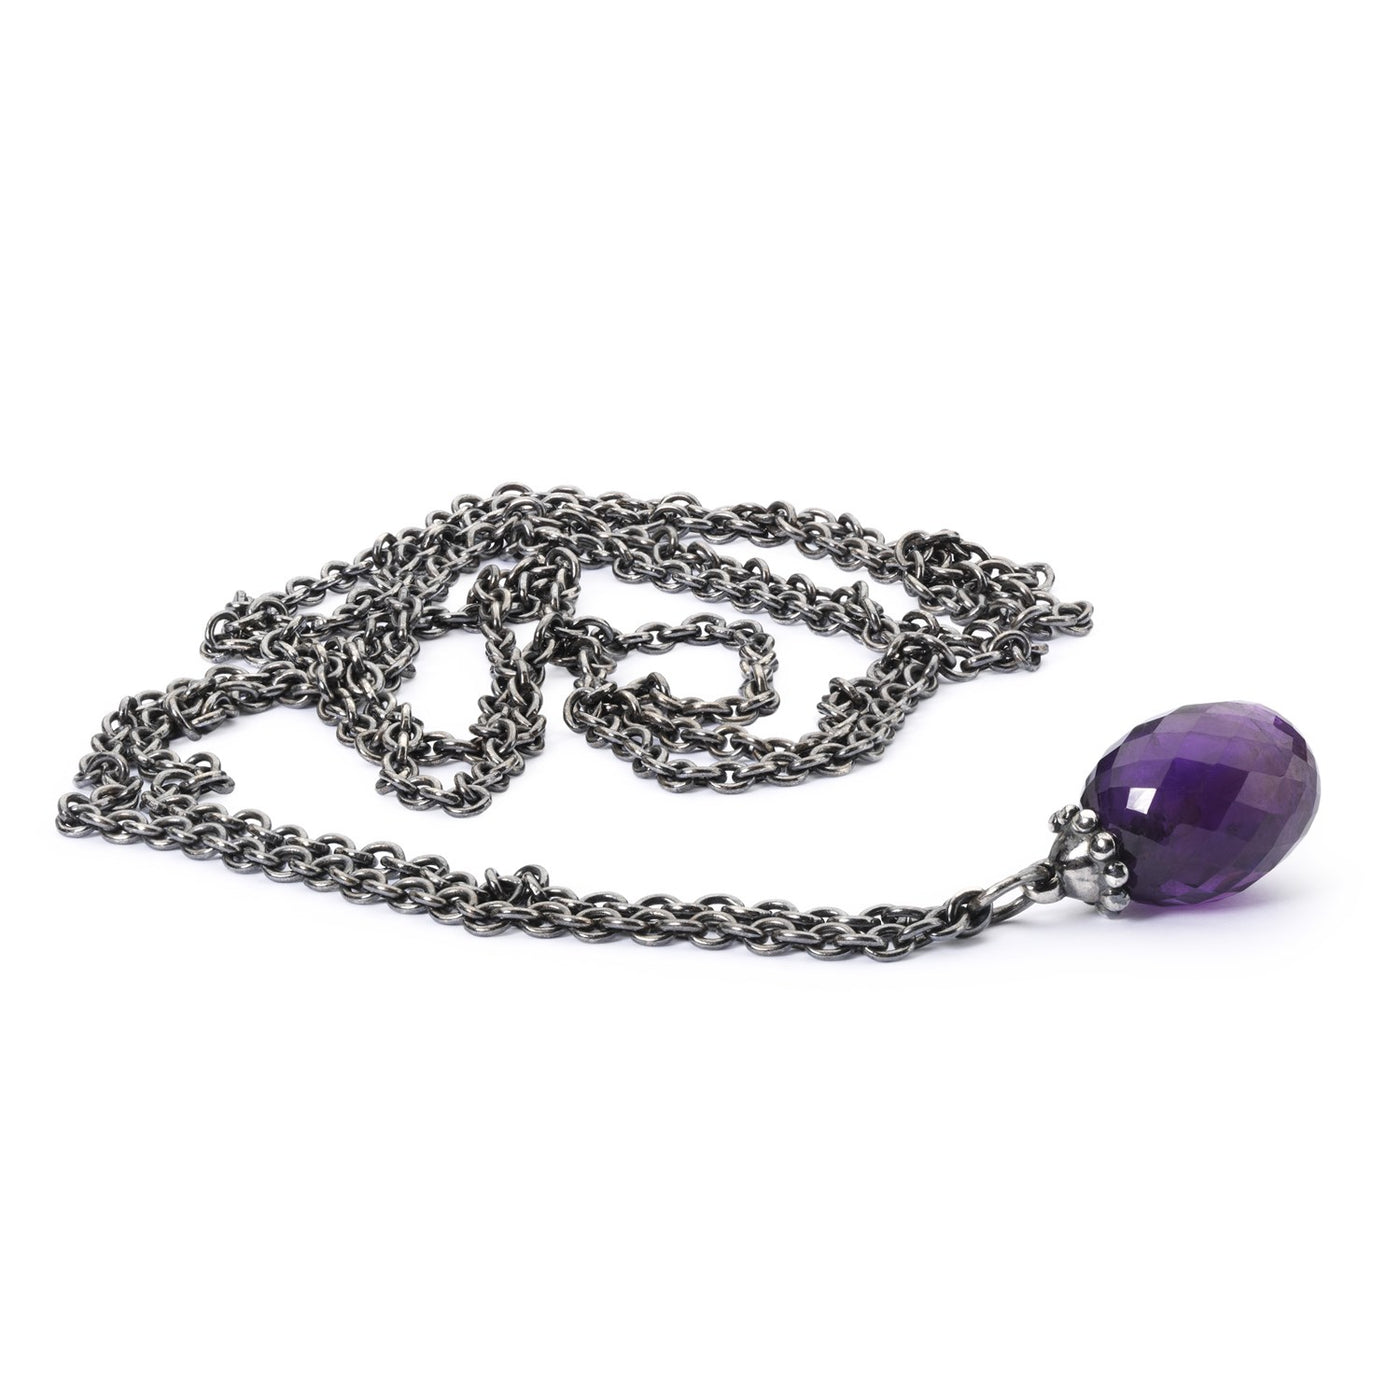 Fantasy Necklace with Amethyst, featuring a delicate chain and a stunning pendant made of amethyst that has a faceted cut, adding a pop of color and glamour to any outfit.